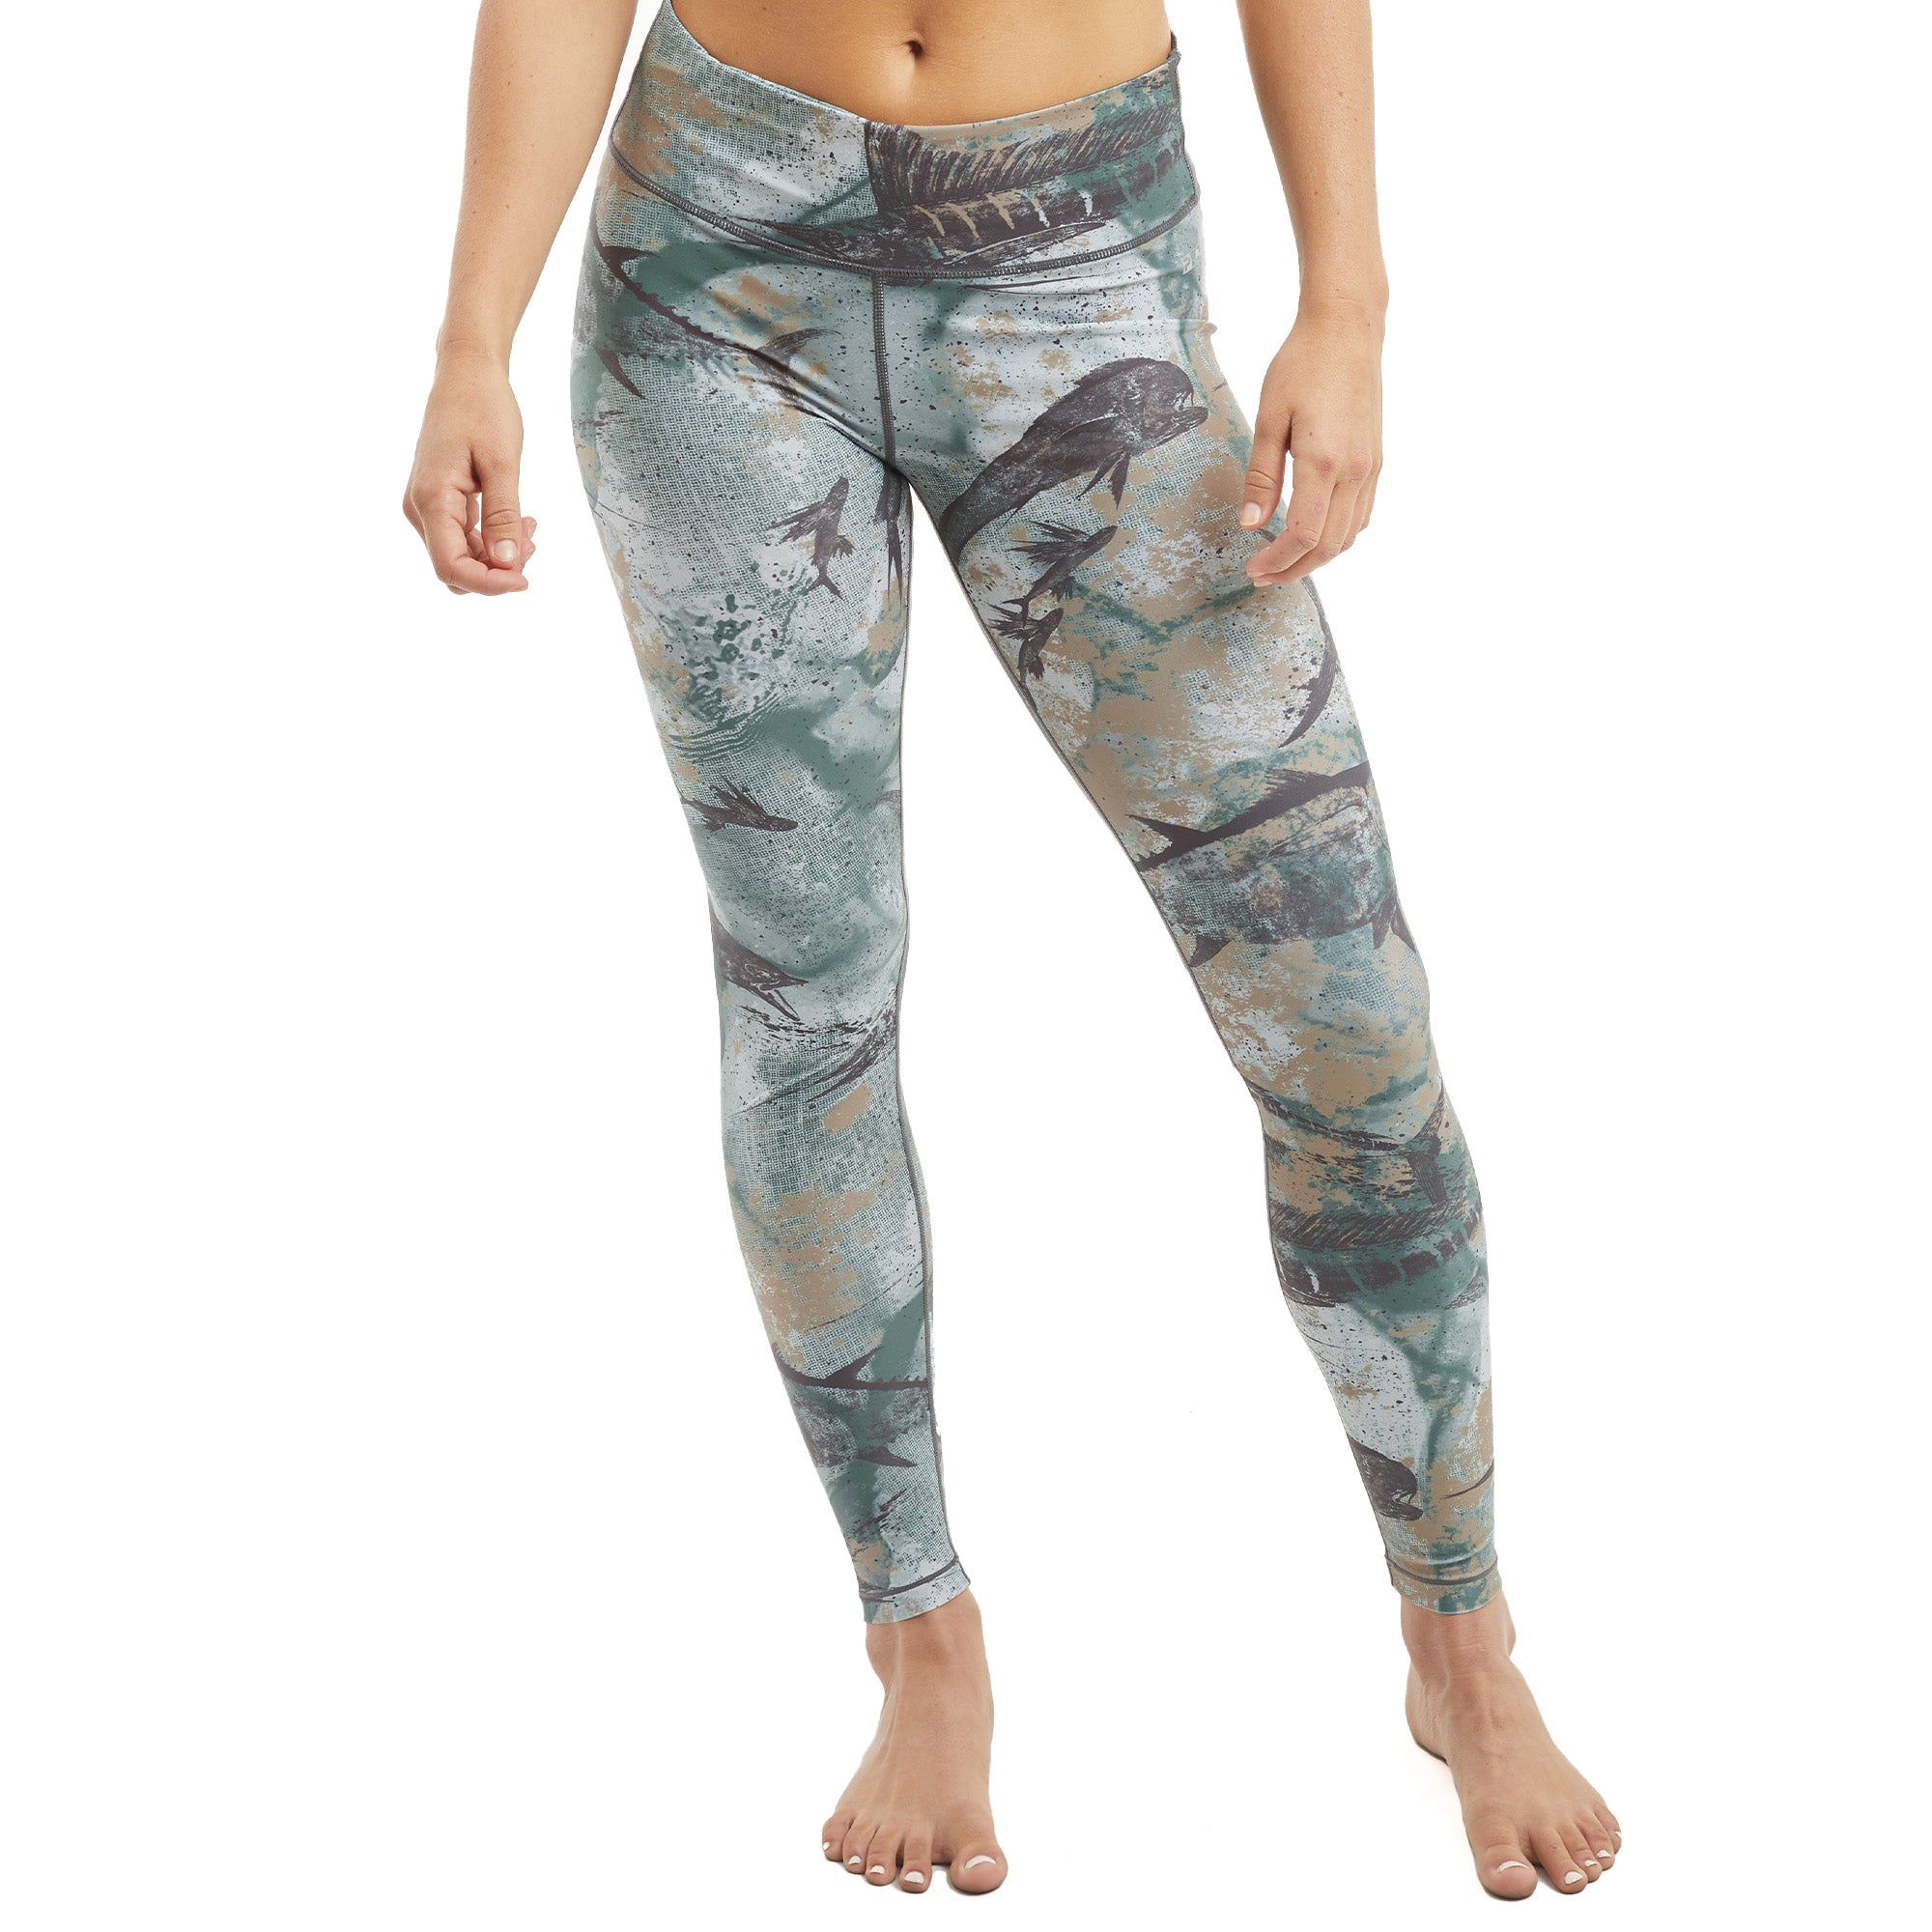 THE BUTTERY SOFT SE Leggings (L, 2XL + 3XL) – Simply Empowered Co